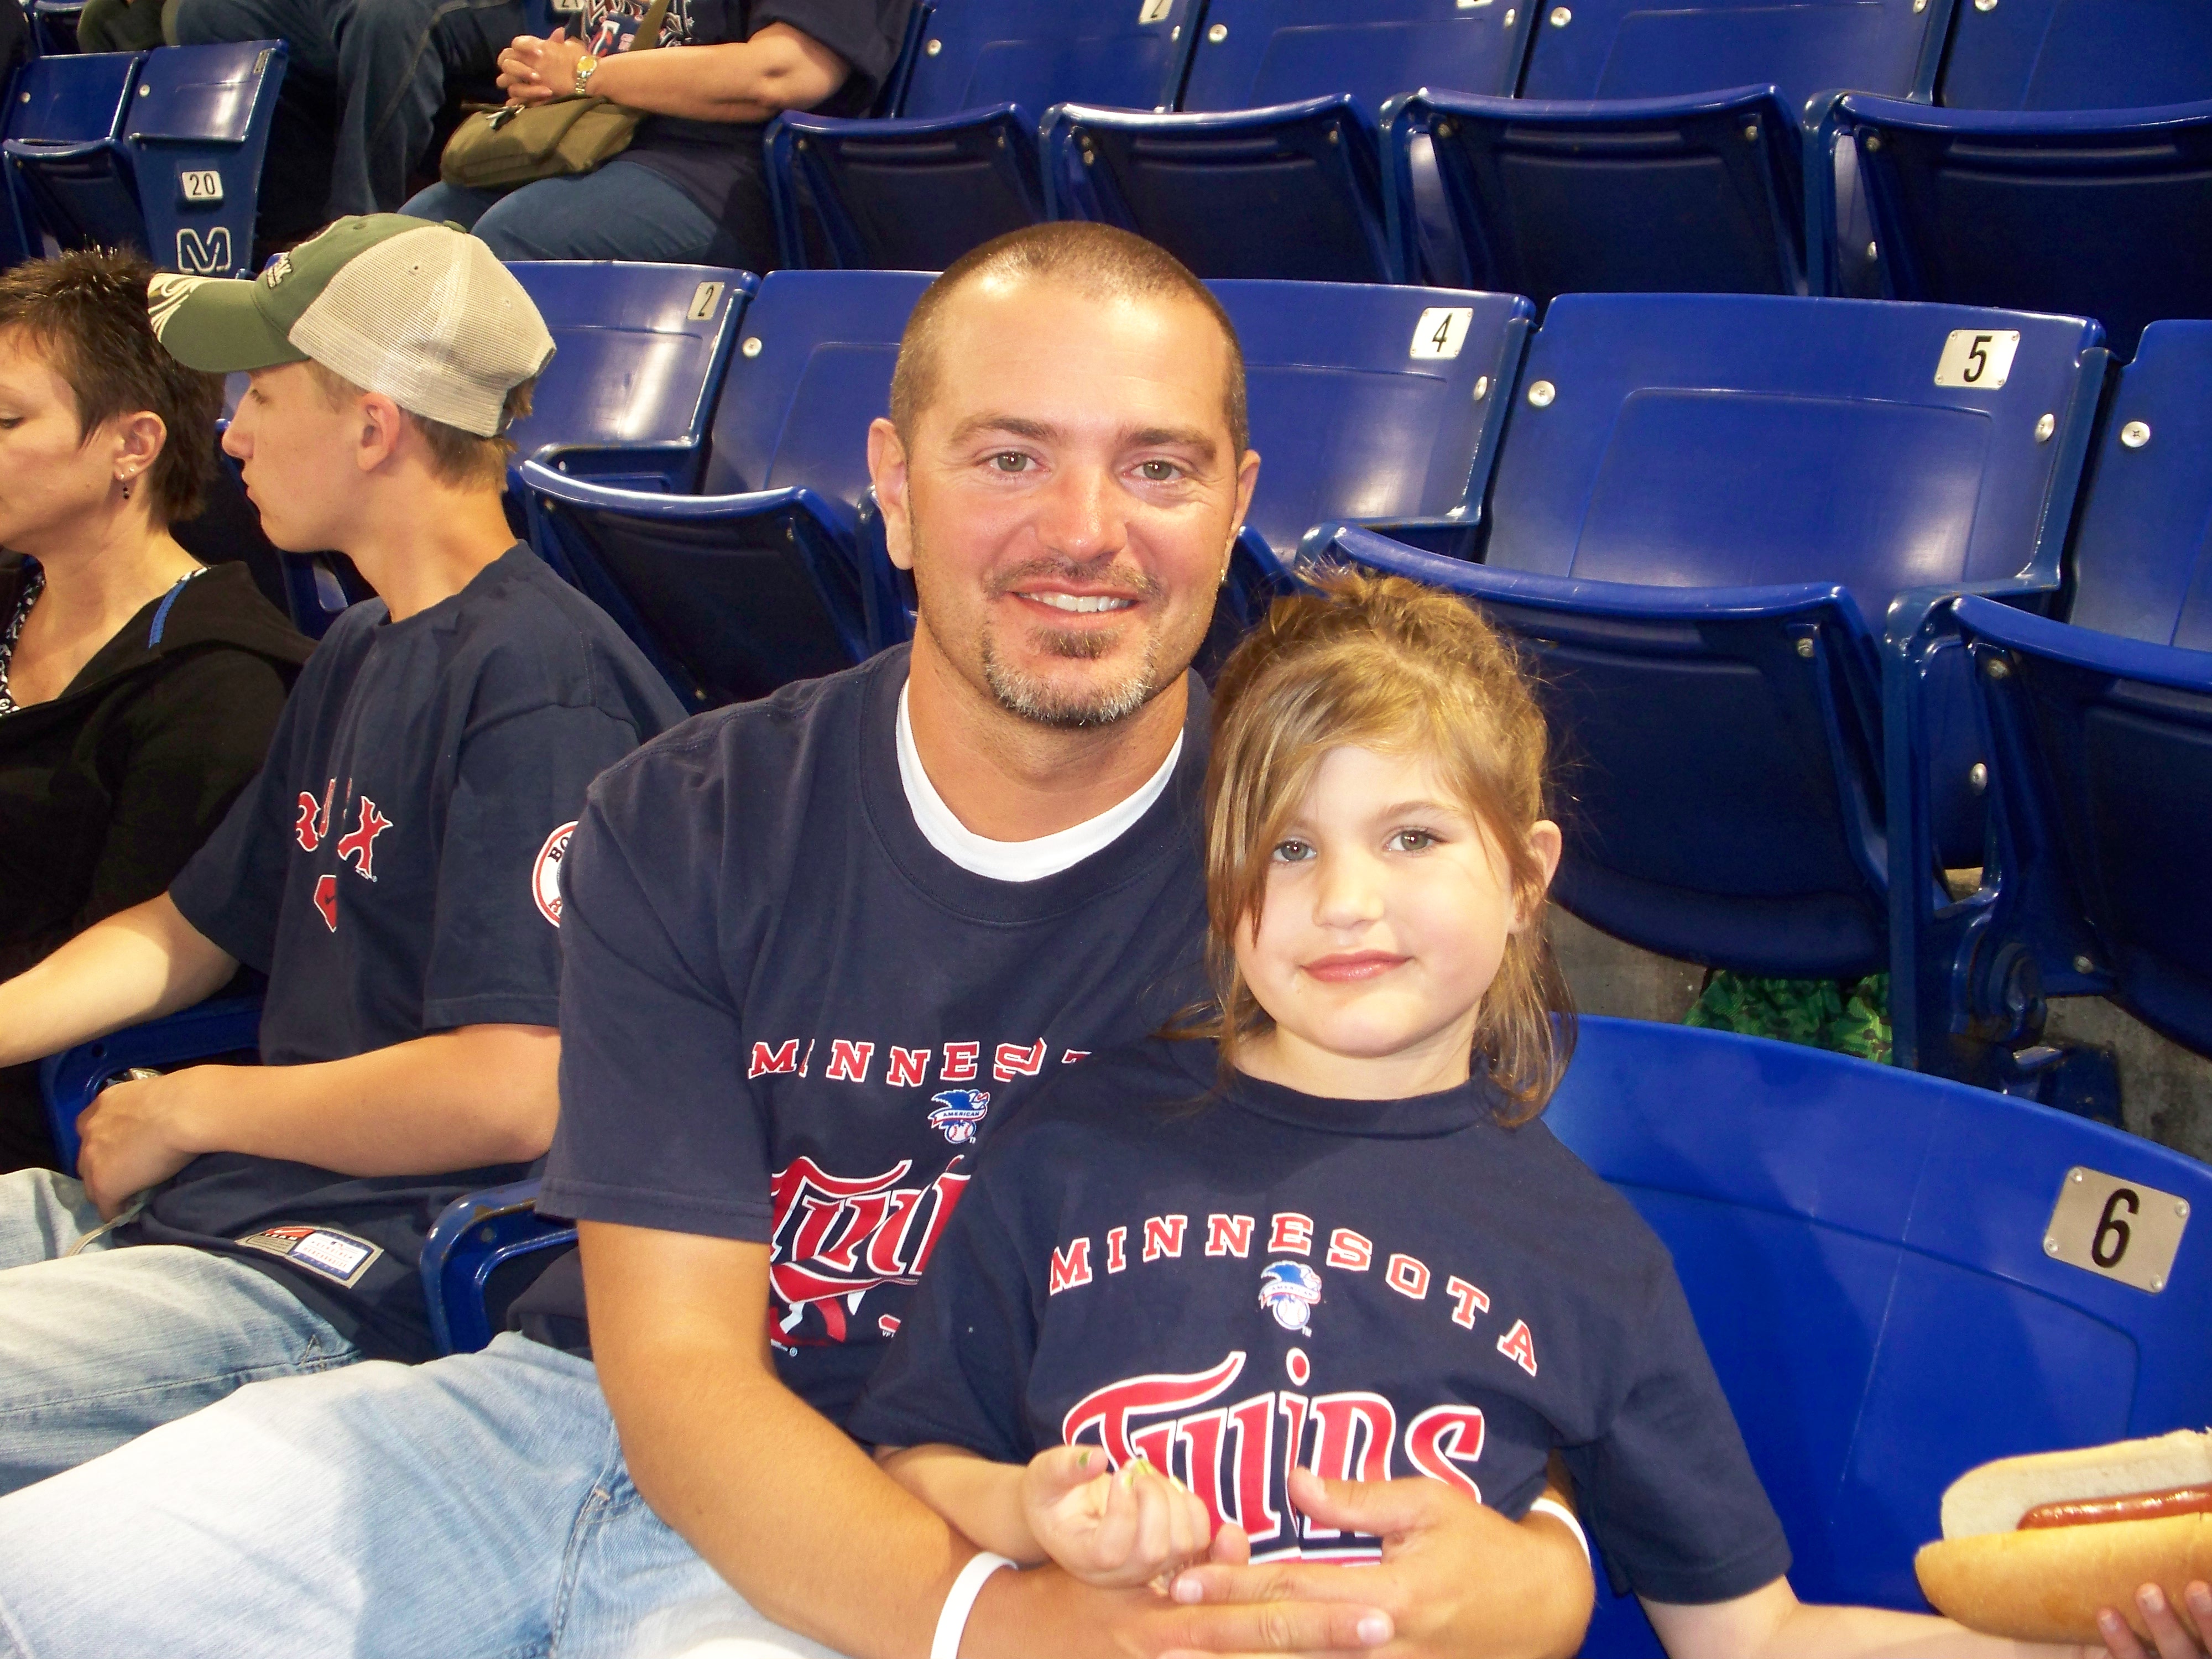 Twins game...last year of the dome